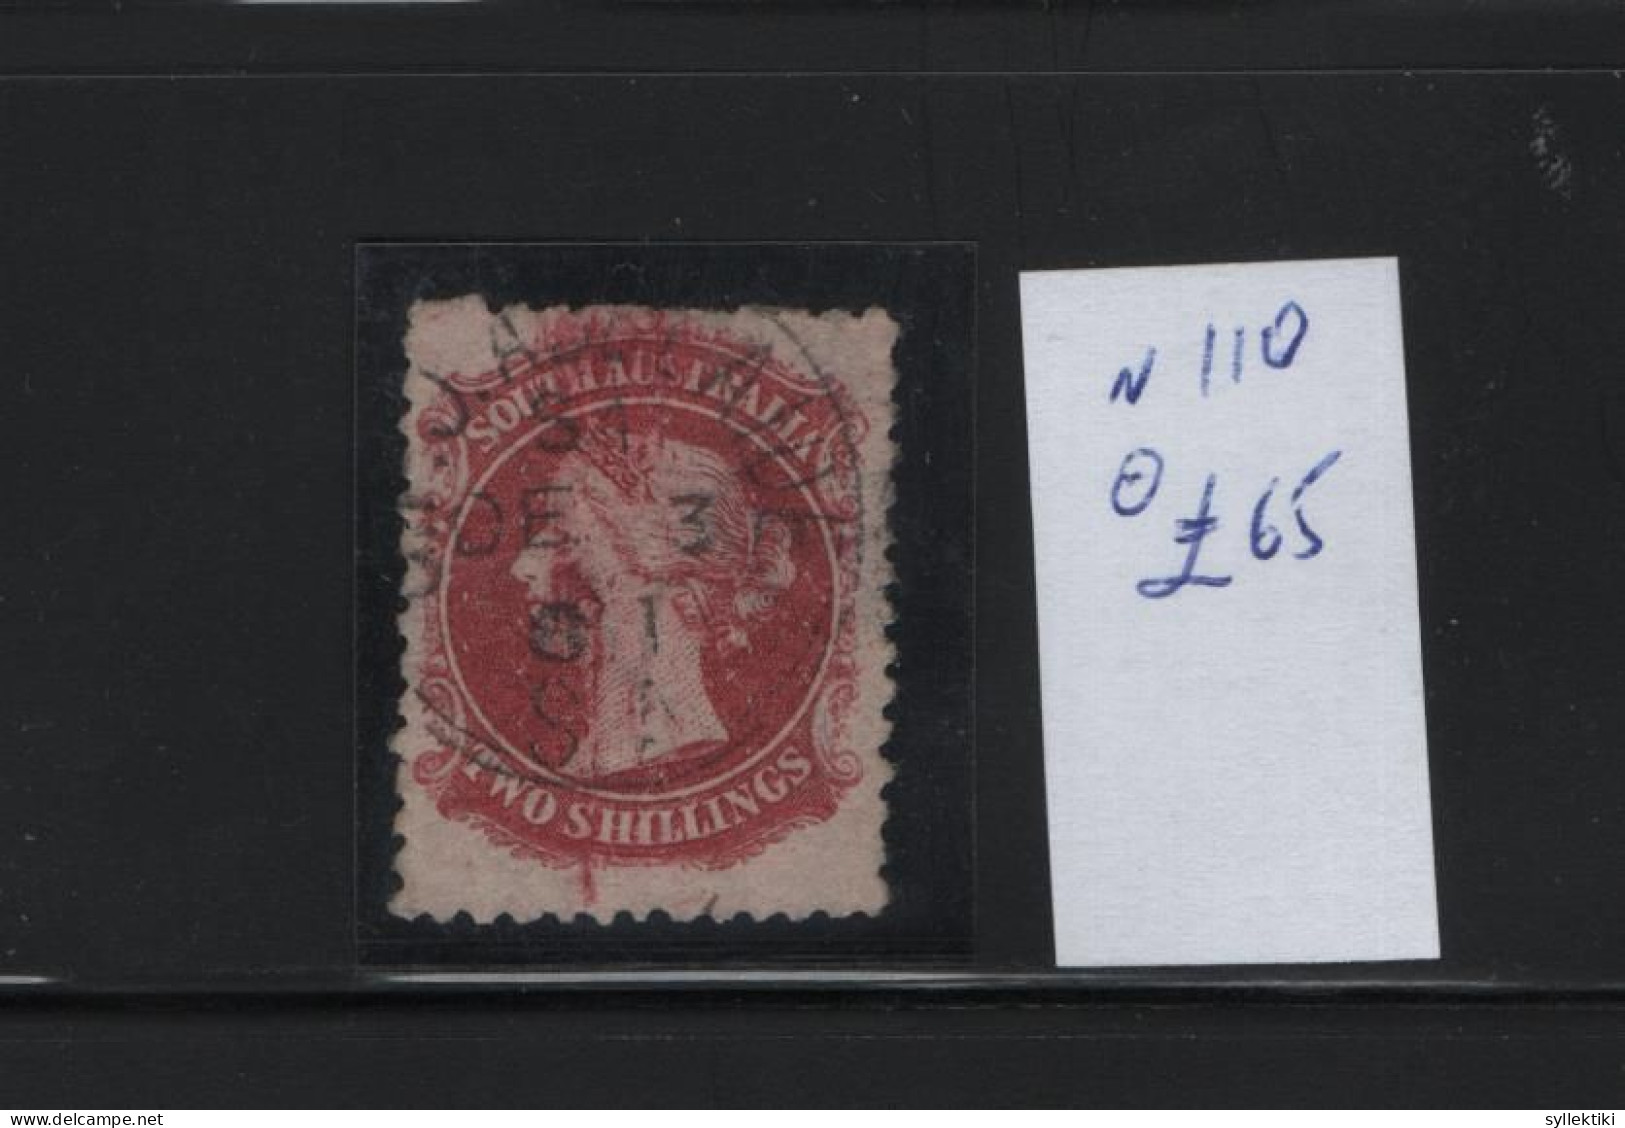 SOUTH AUSTRALIA  1870/73 2 SHILLINGS USED STAMP   STANLEY GIBBONS No 110 AND VALUE GBP 65.00 - Oblitérés